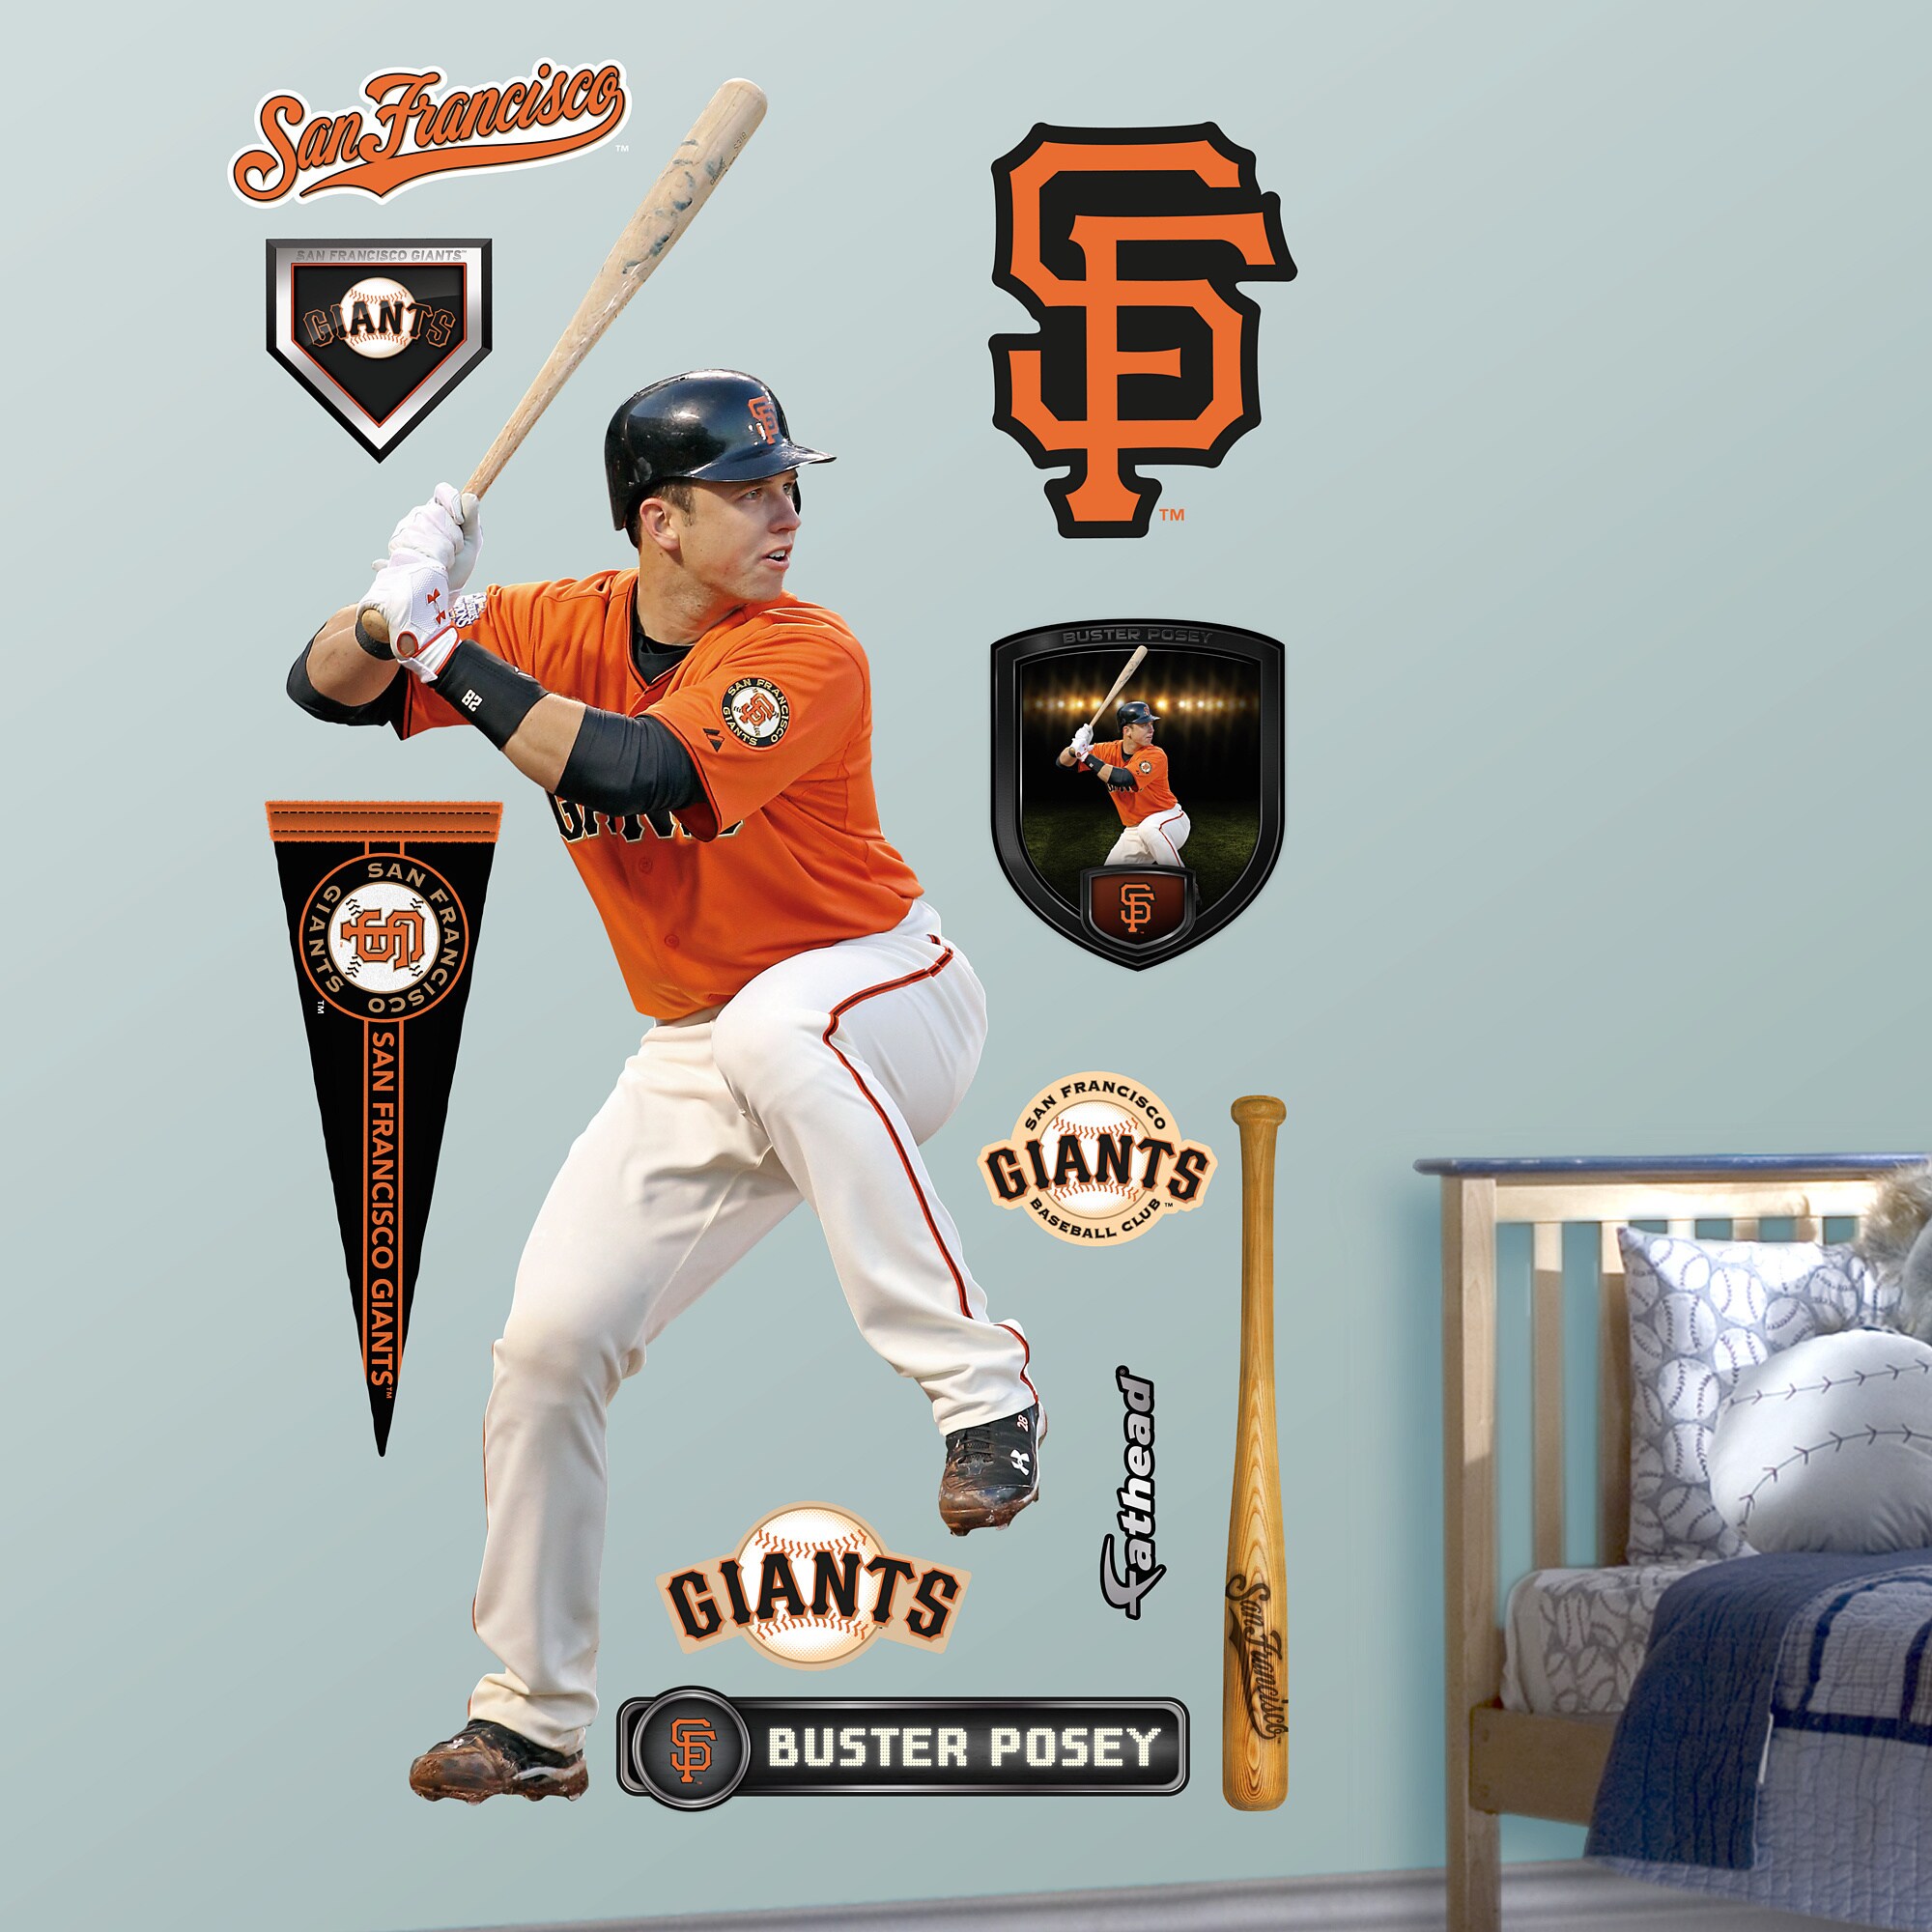 San Francisco Giants Buster Posey Fathead Life Size Removable Wall Decal